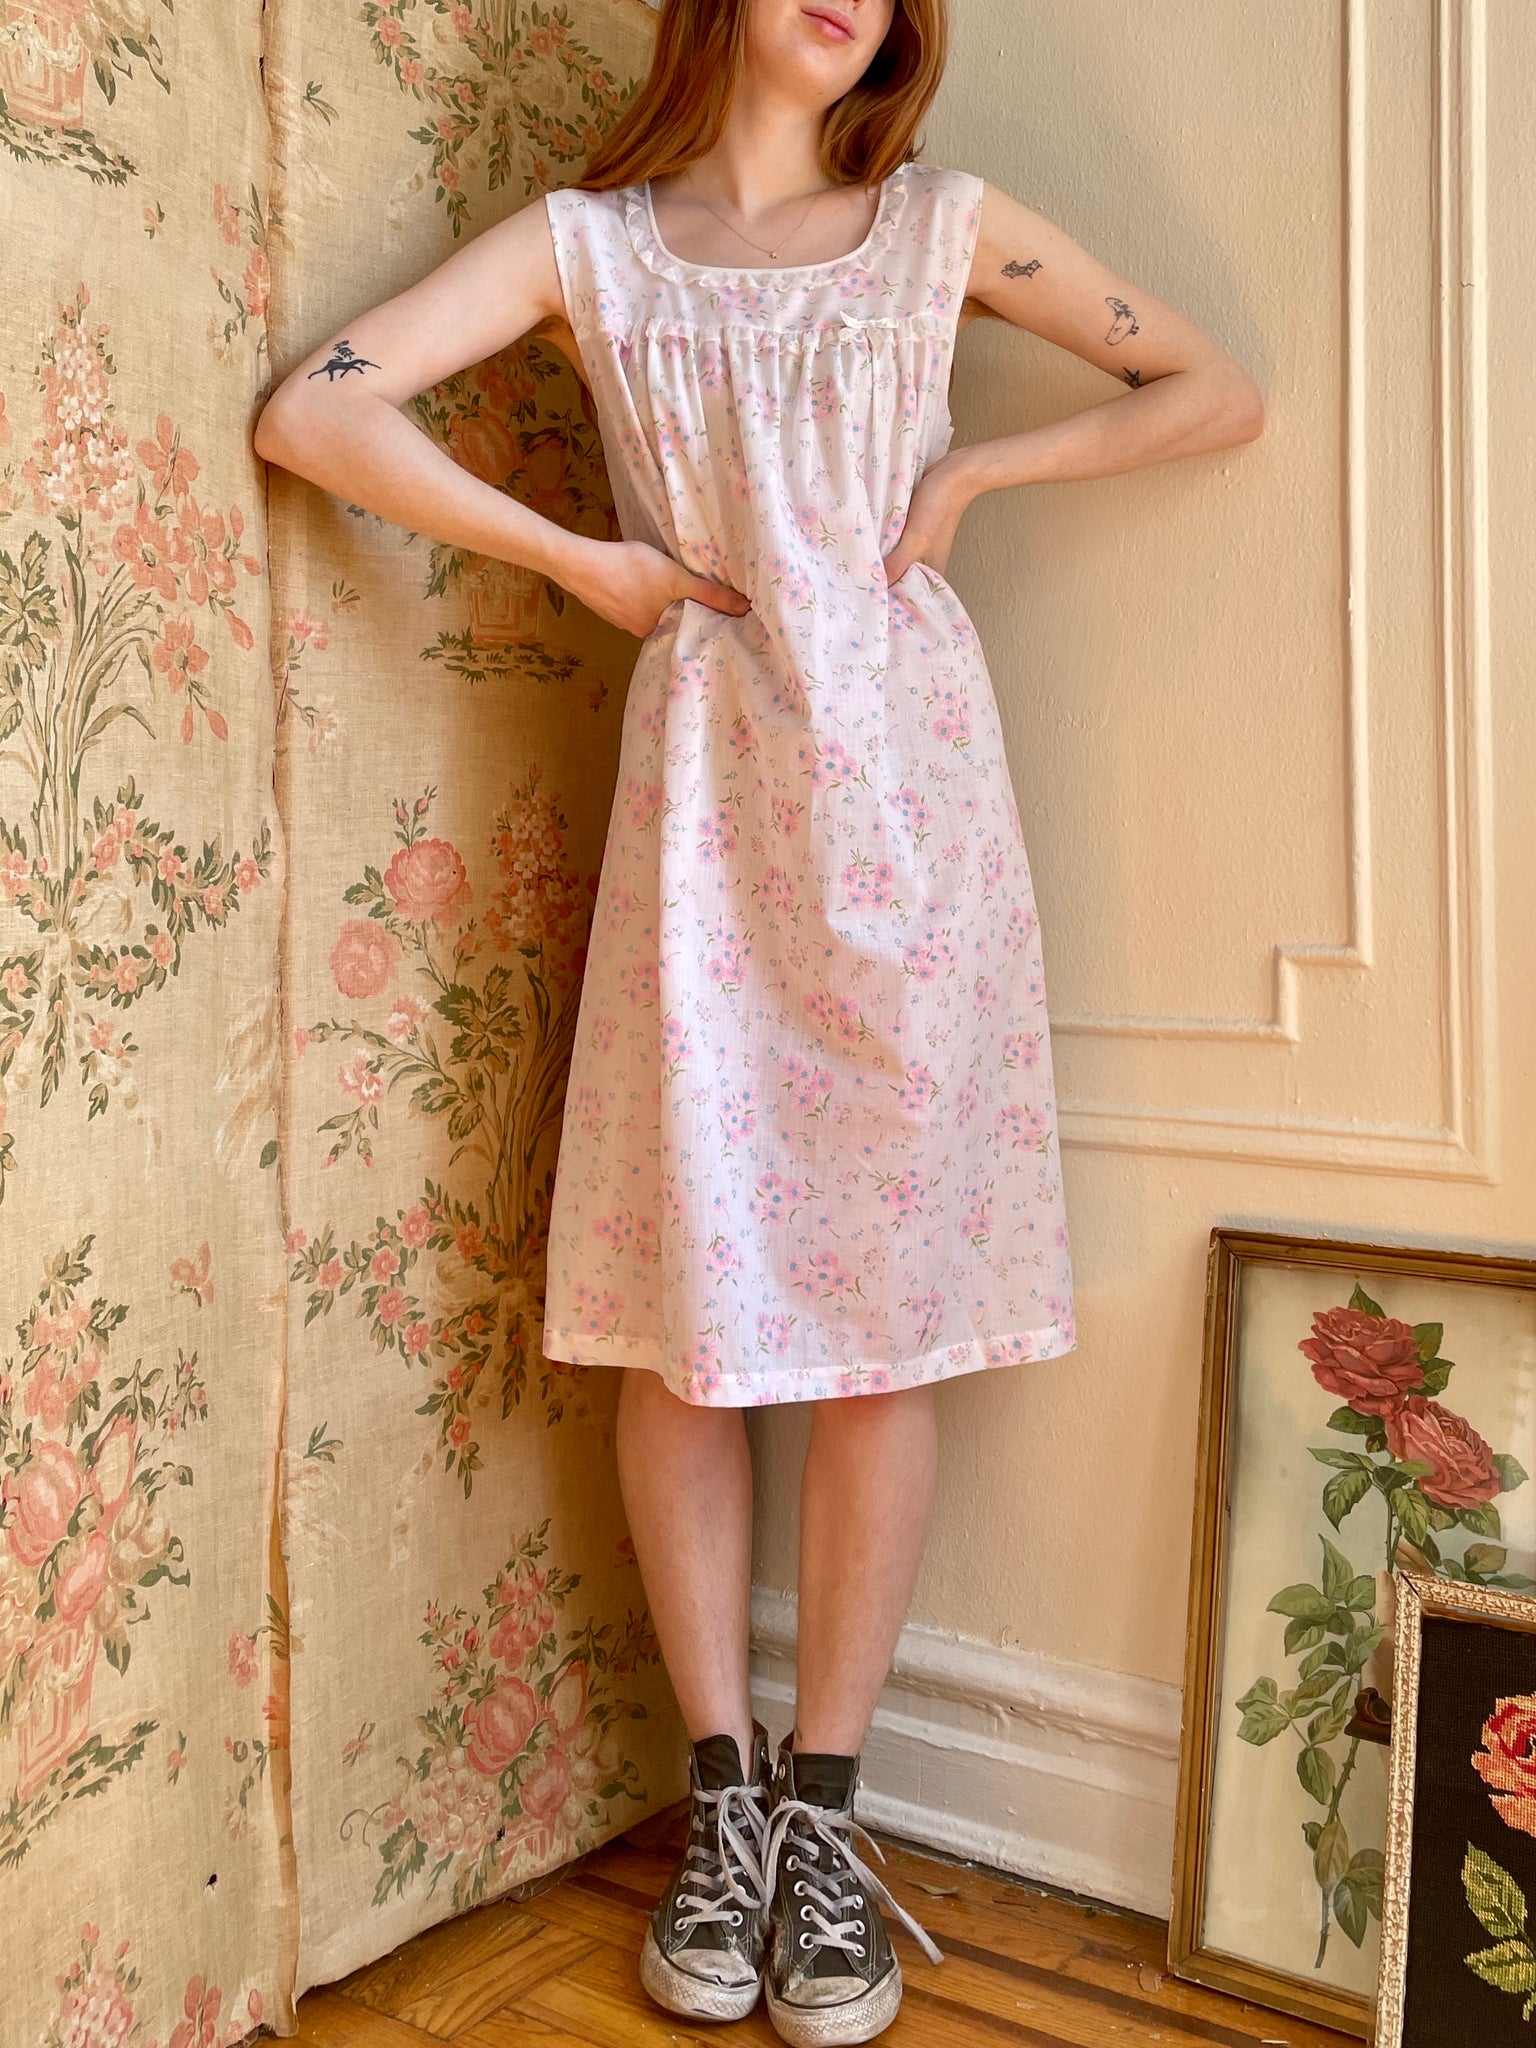 1960s Blue and Pink Floral Daisy White Cotton Dress